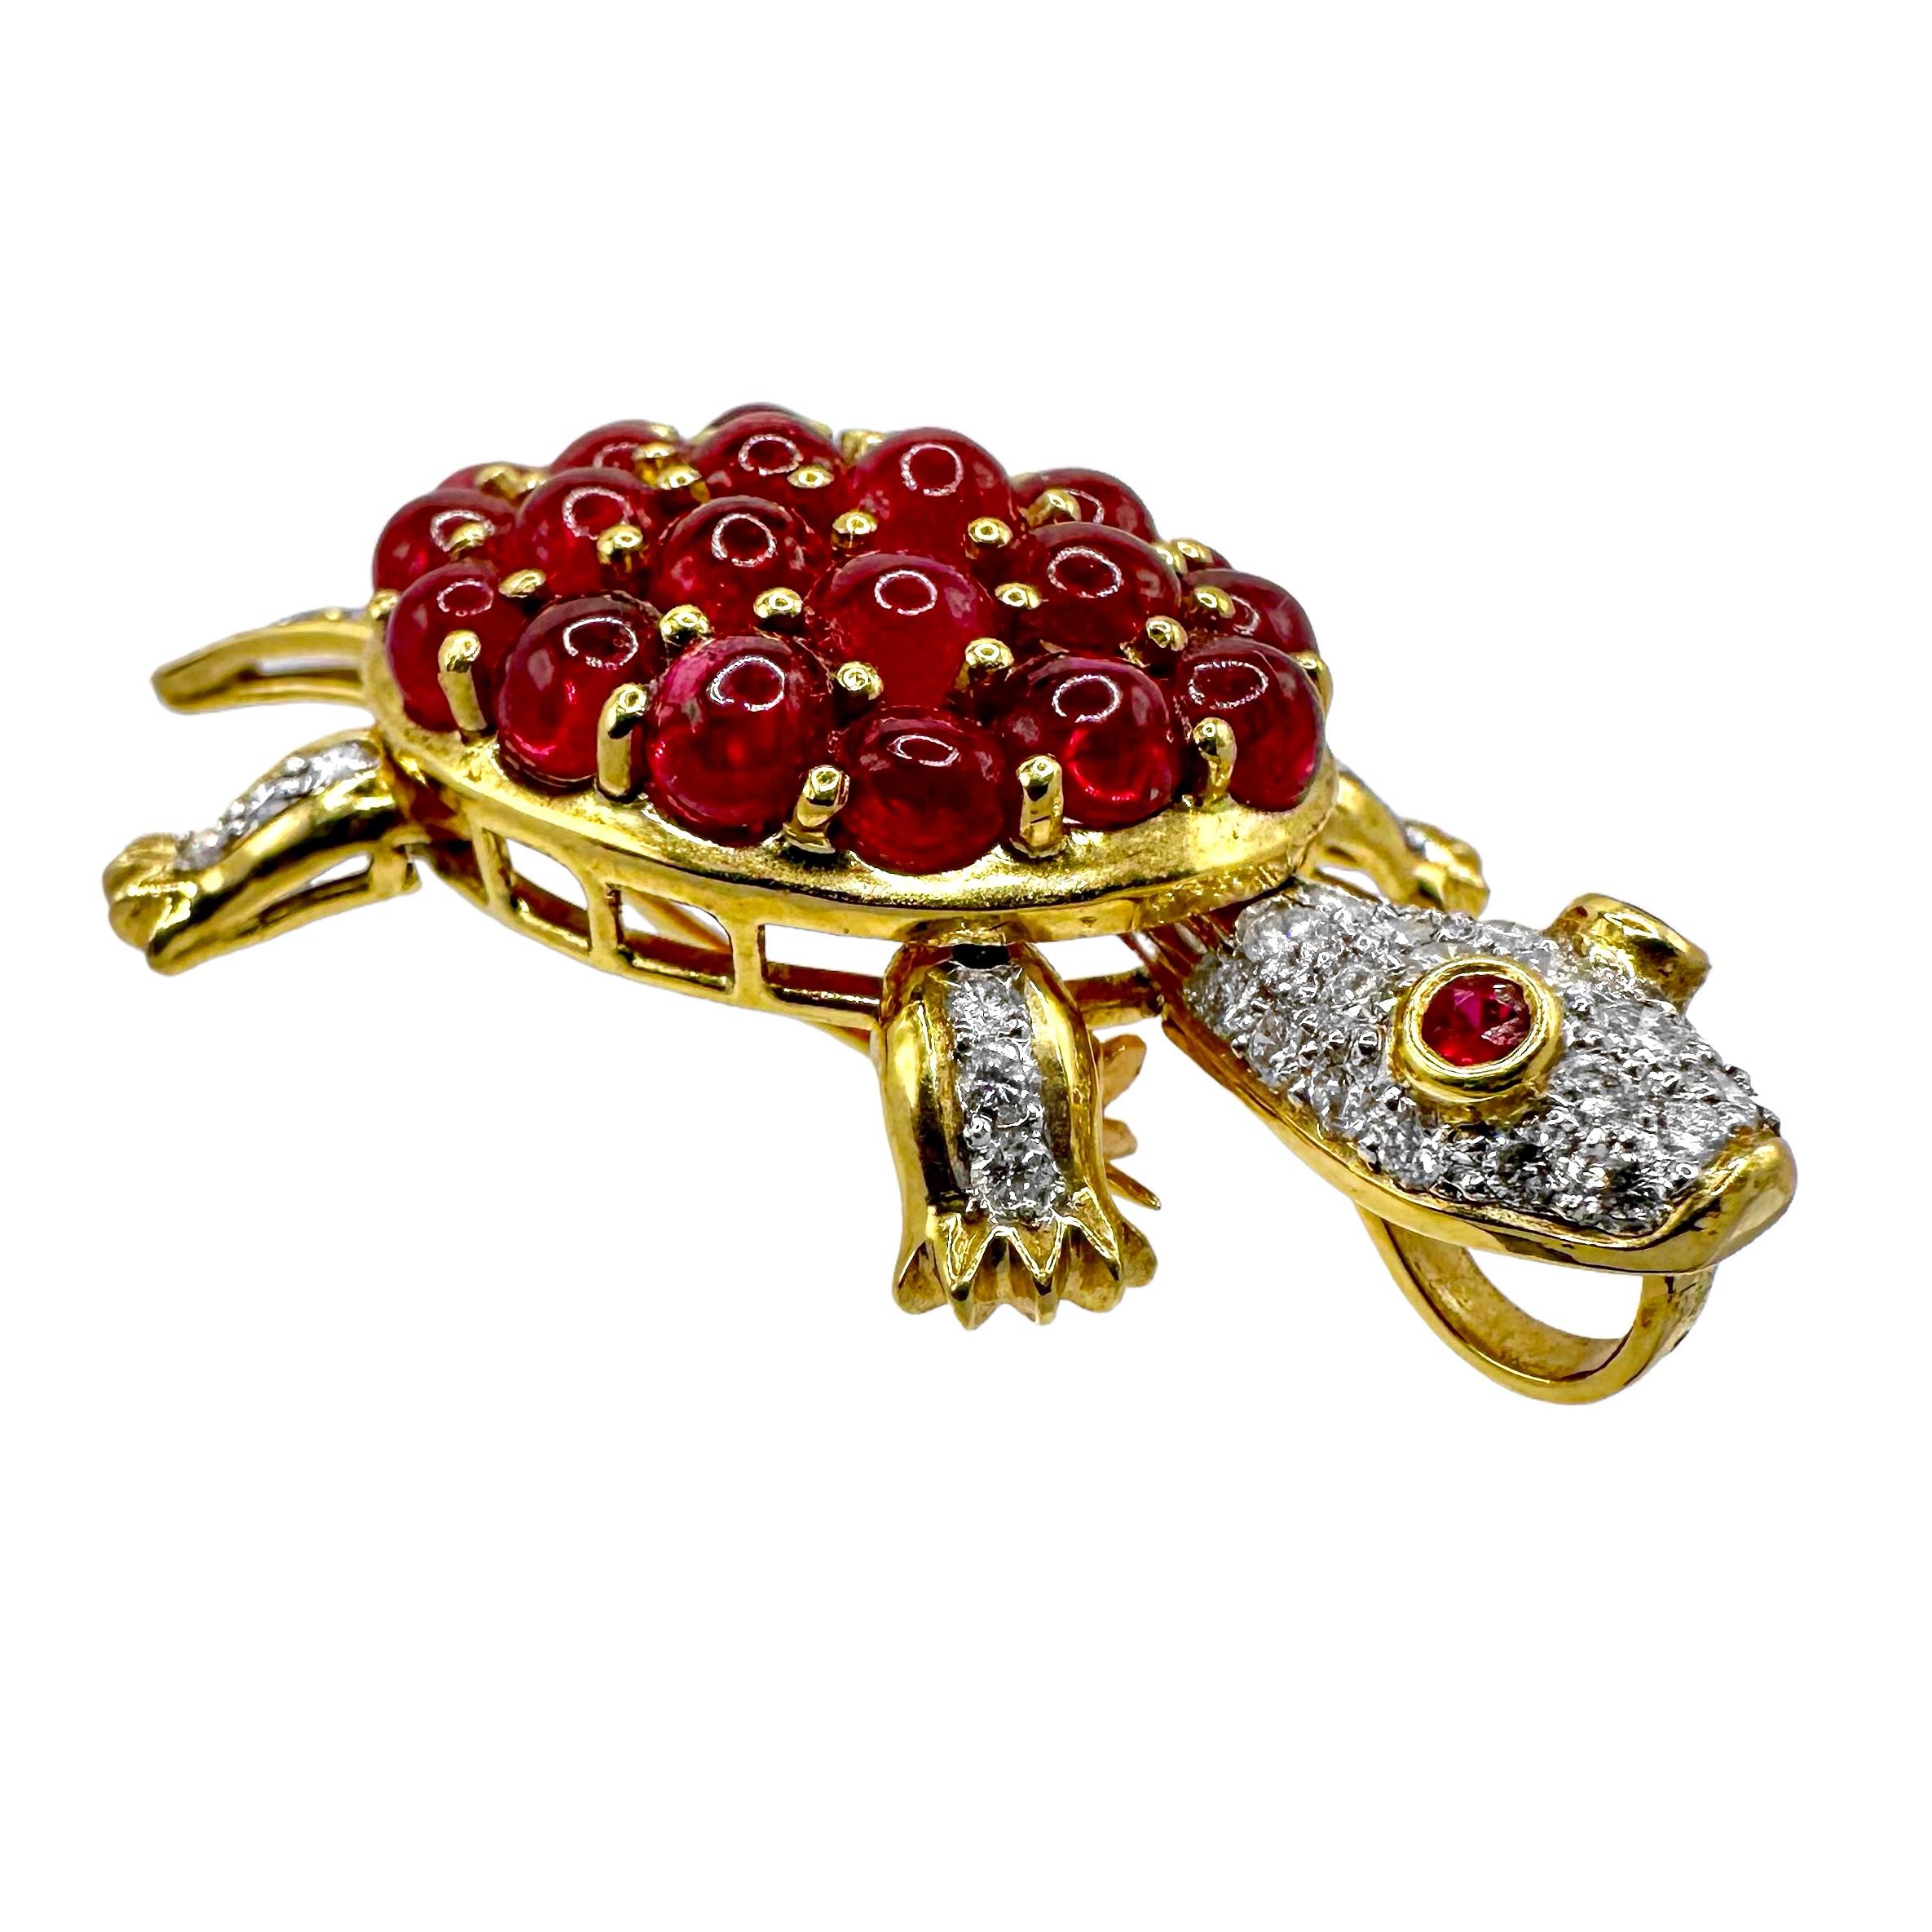 Women's or Men's Adorable Turtle Brooch/Pendant with Motion in 18K Gold, Diamonds, and Rubies For Sale